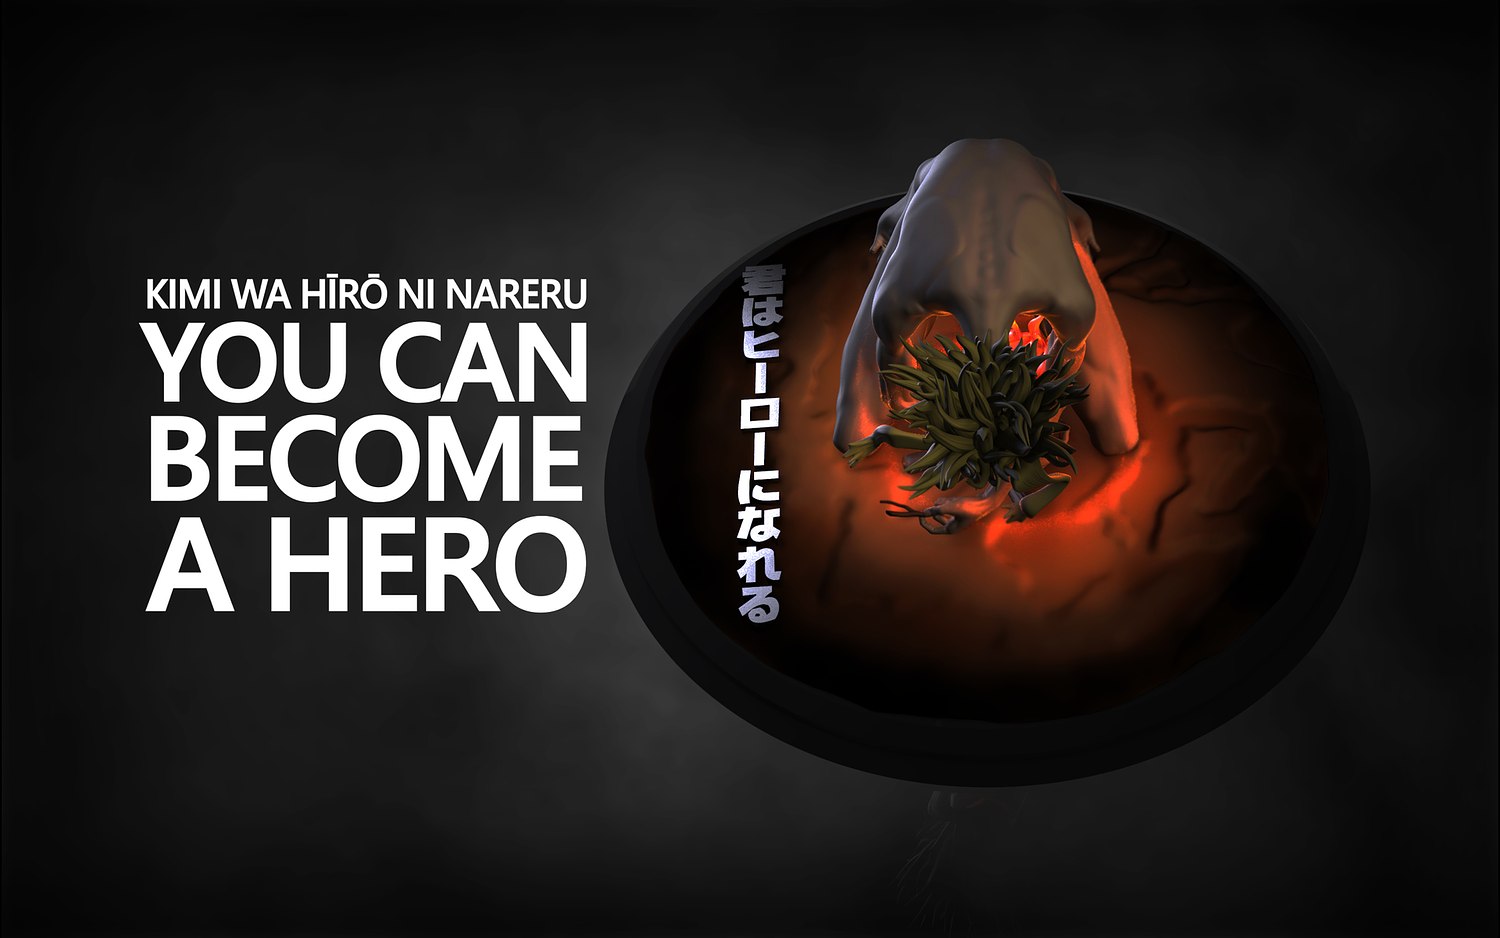 One for all - You can become a Hero